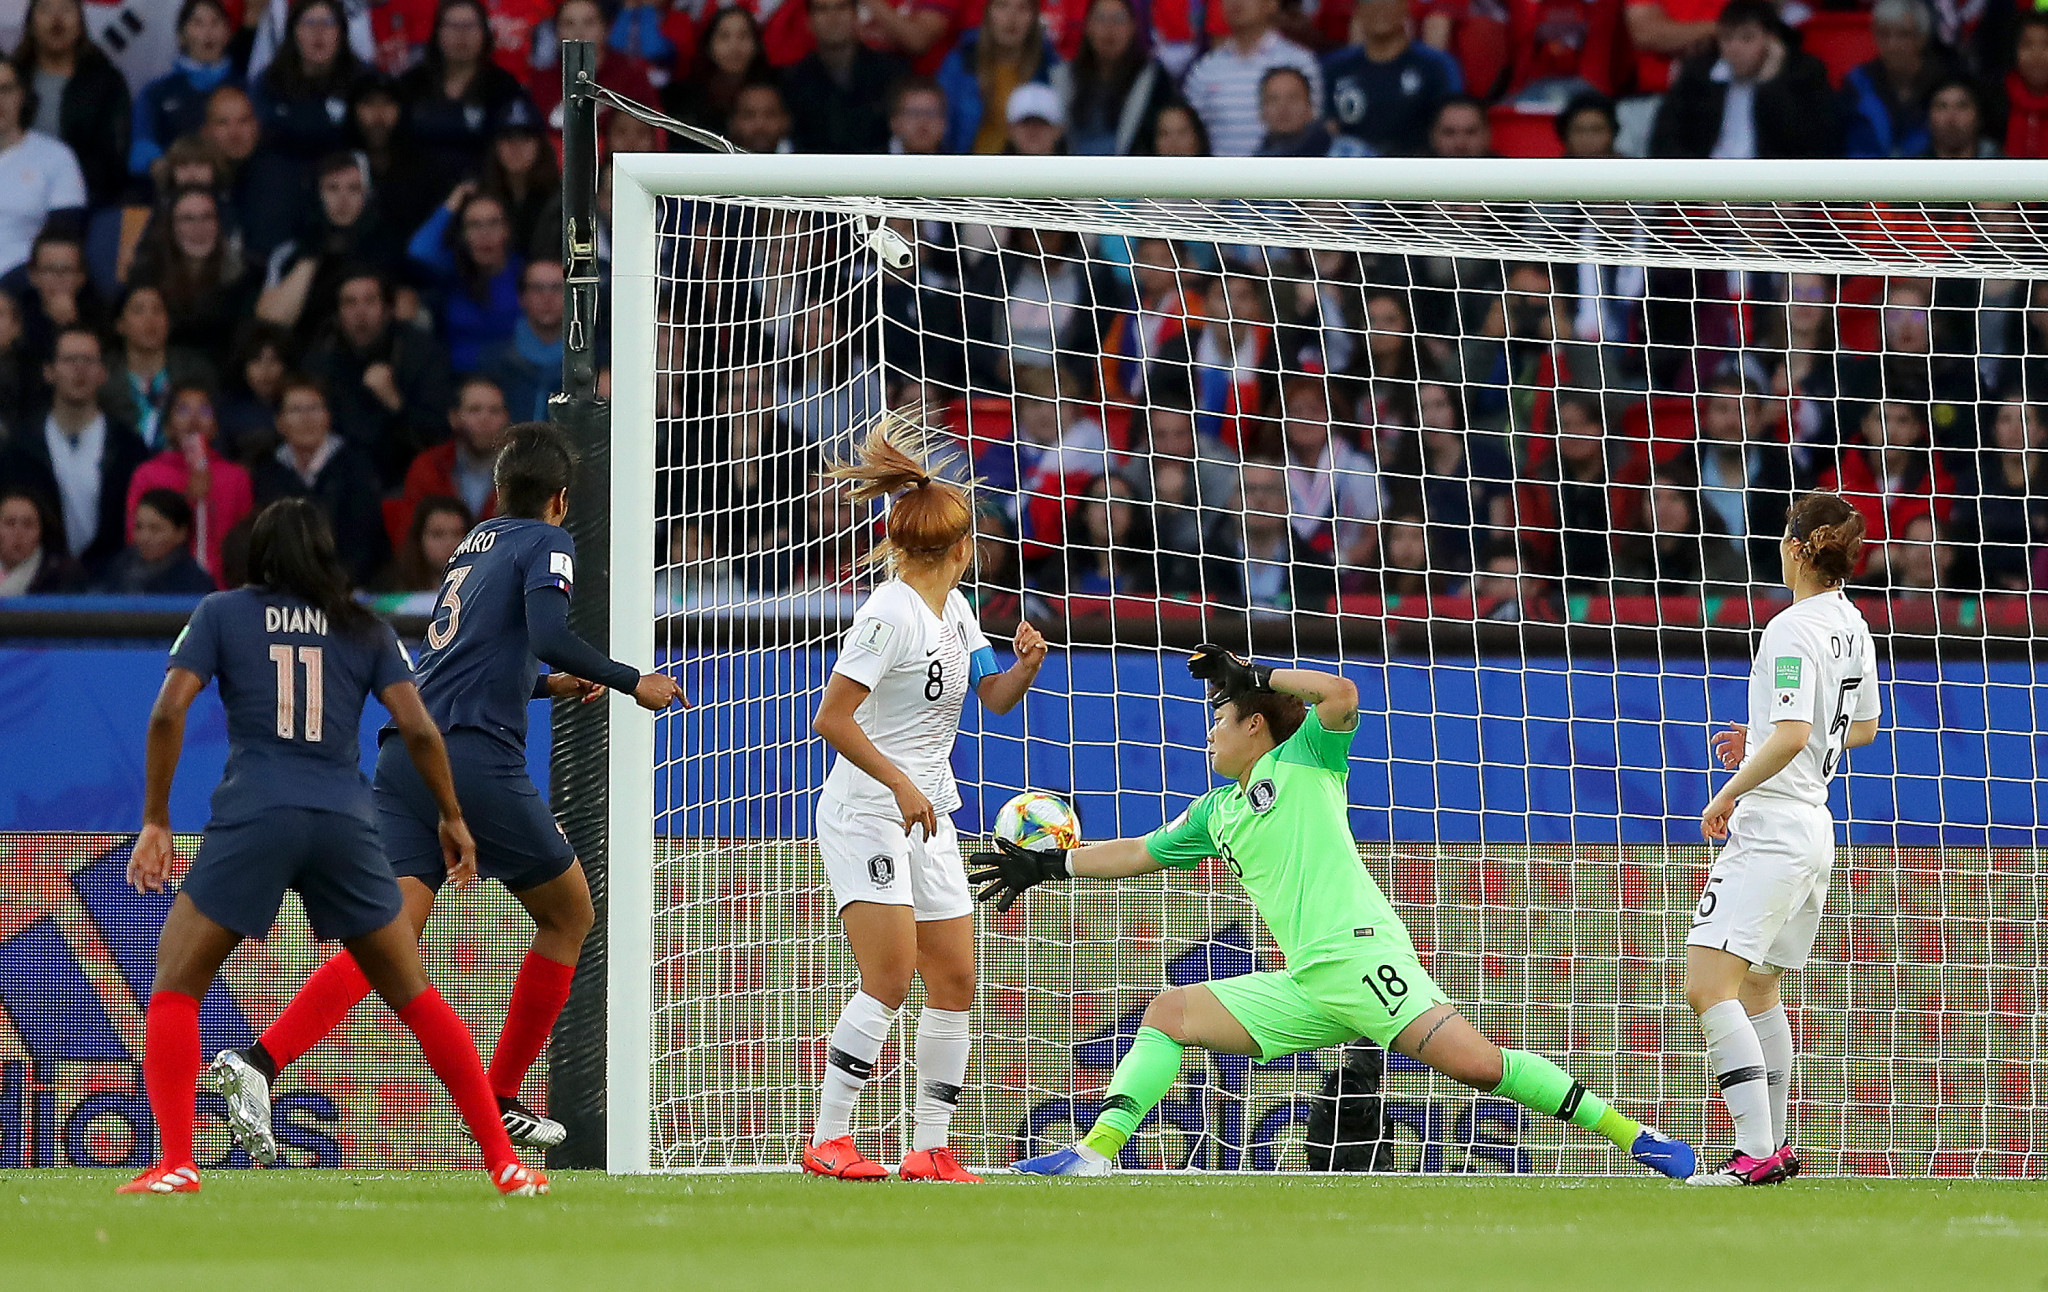 Wendie Renard scored two goals in France's 4-0 defeat of South Korea at the FIFA Women's World Cup ©Getty Images